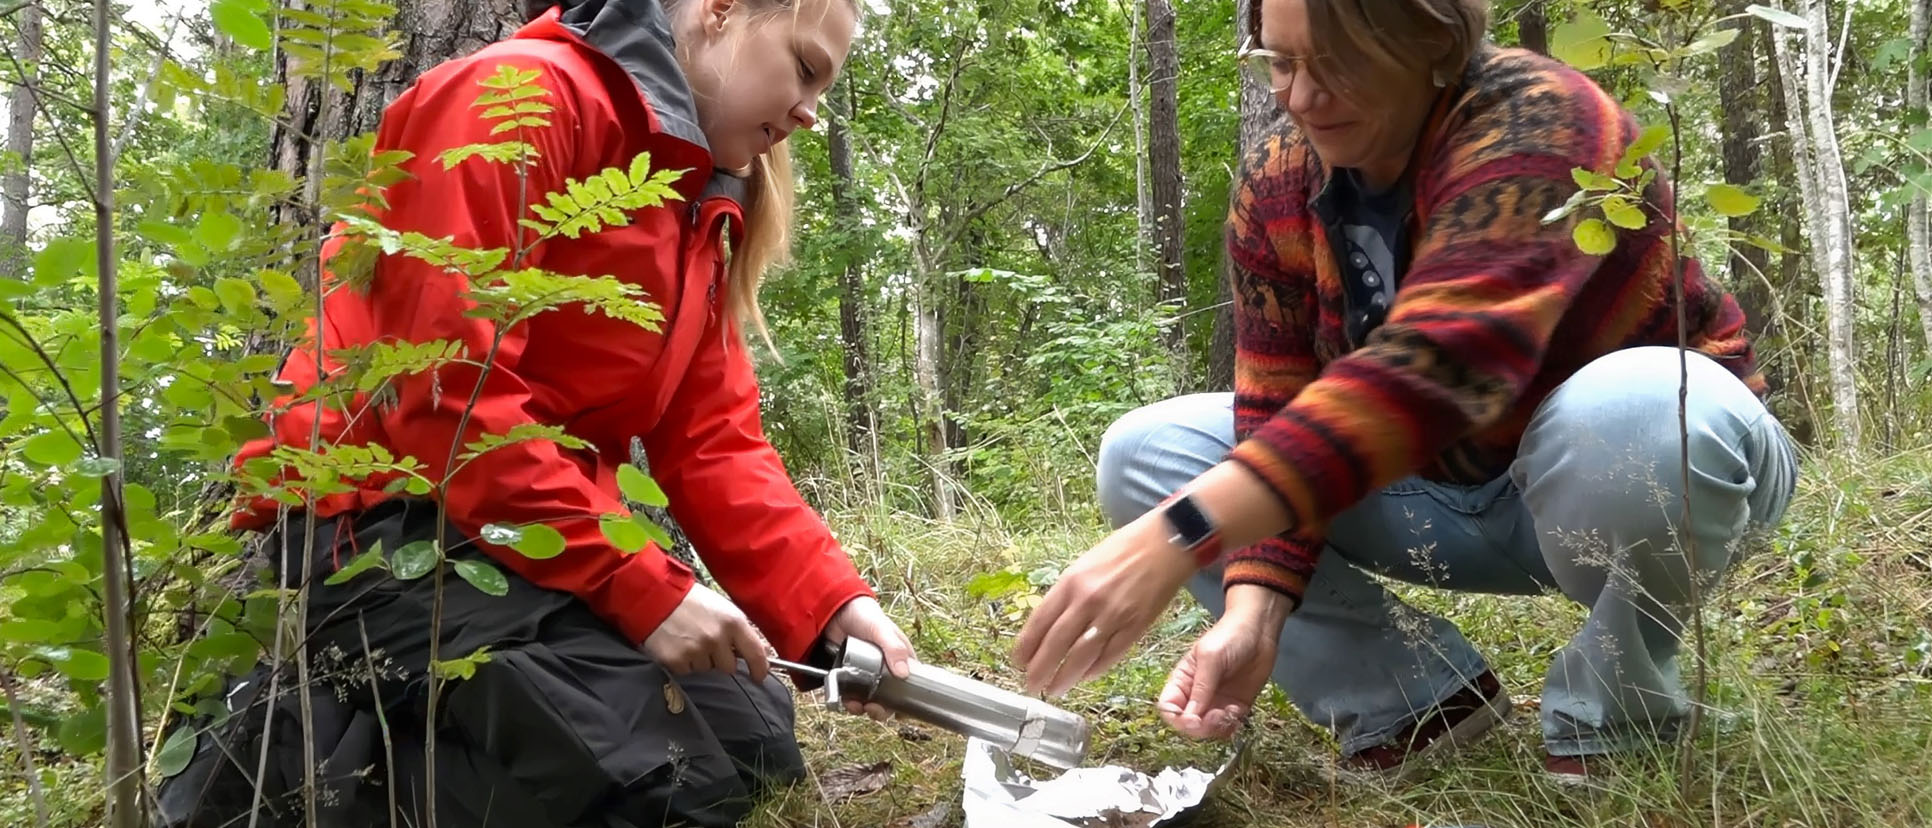 two researchers are squatting and taking samples from the earth